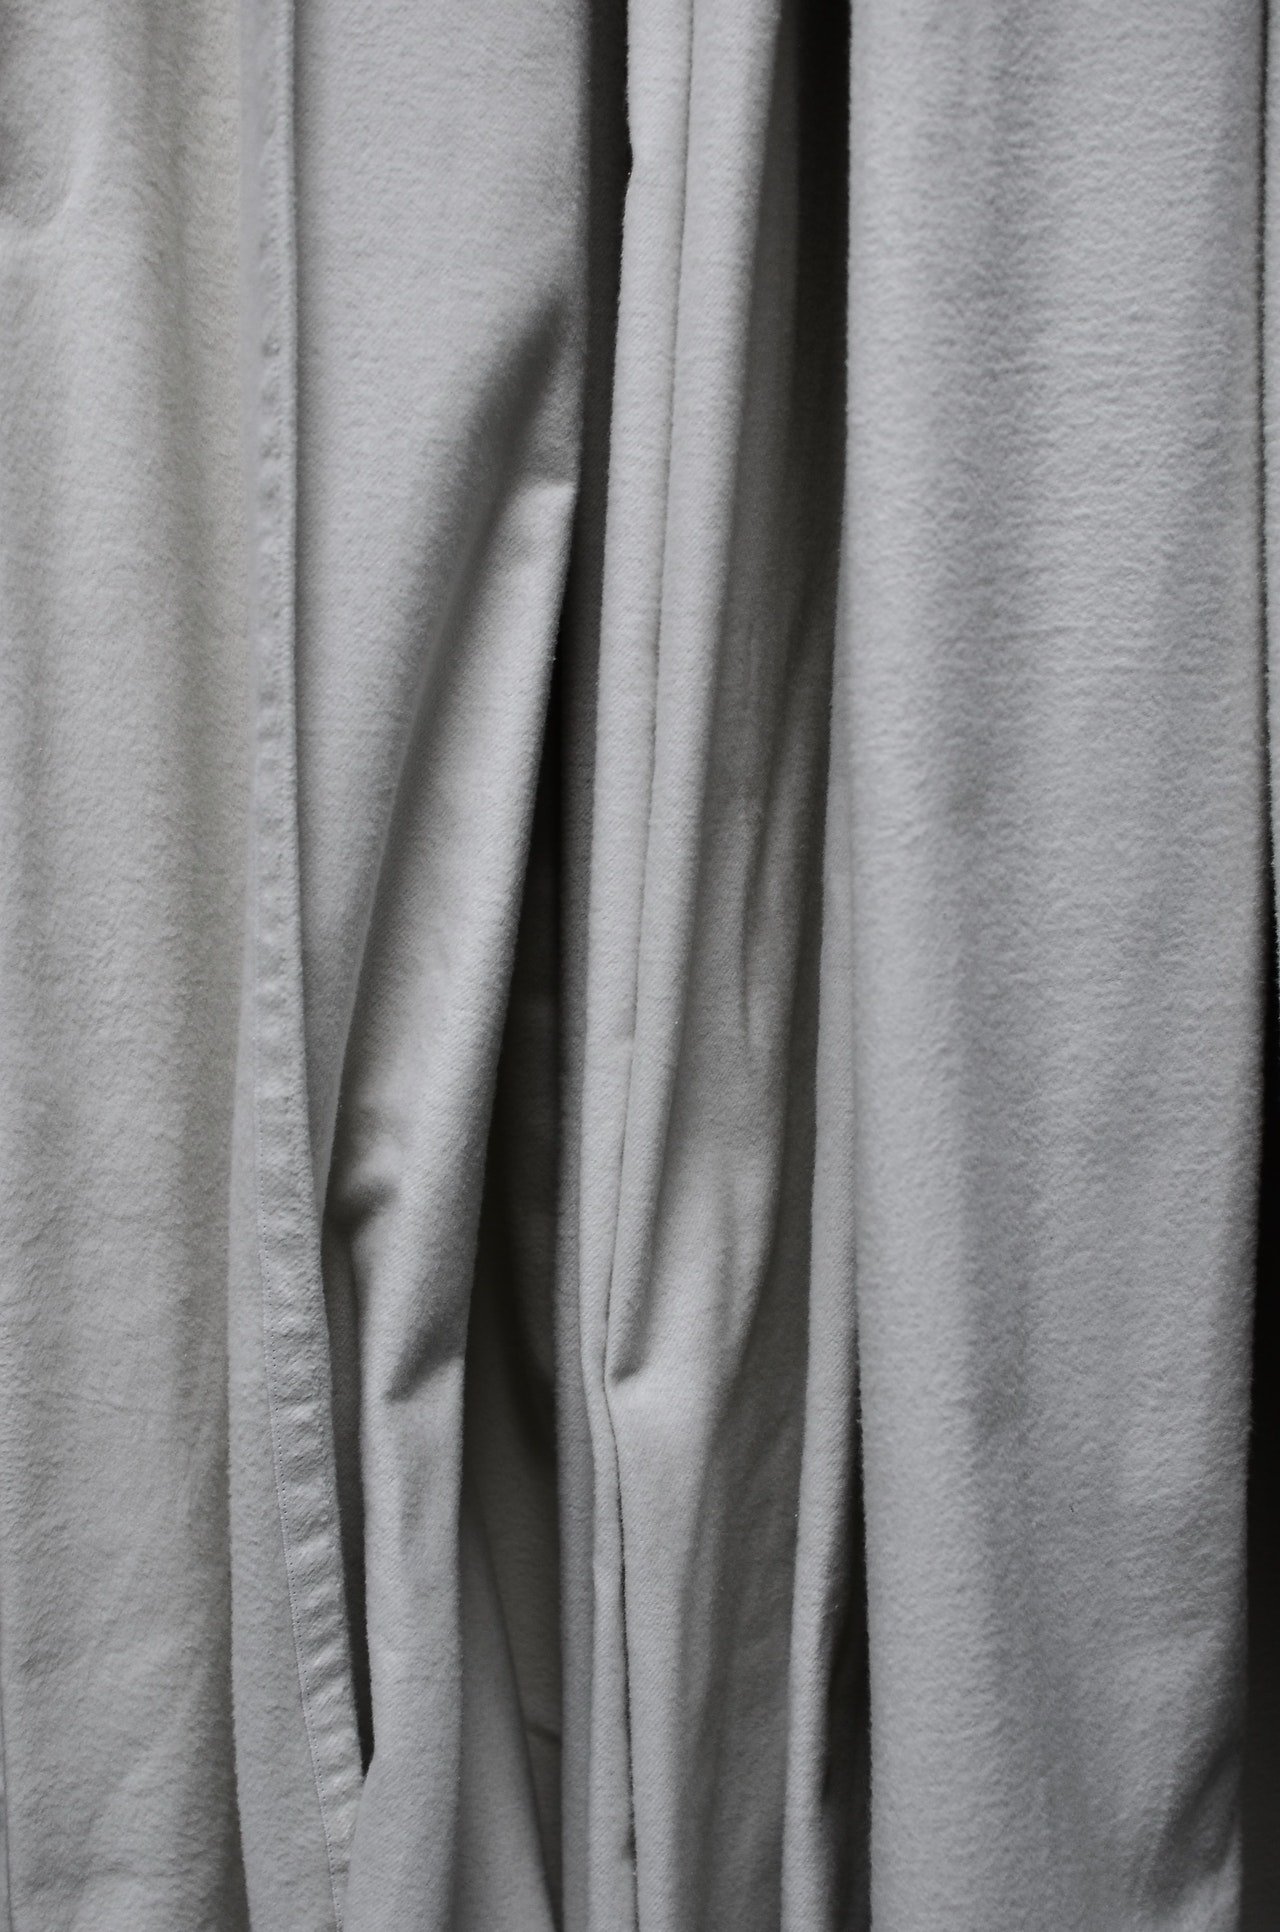 A thick curtain covered part of one wall. | Source: Pexels